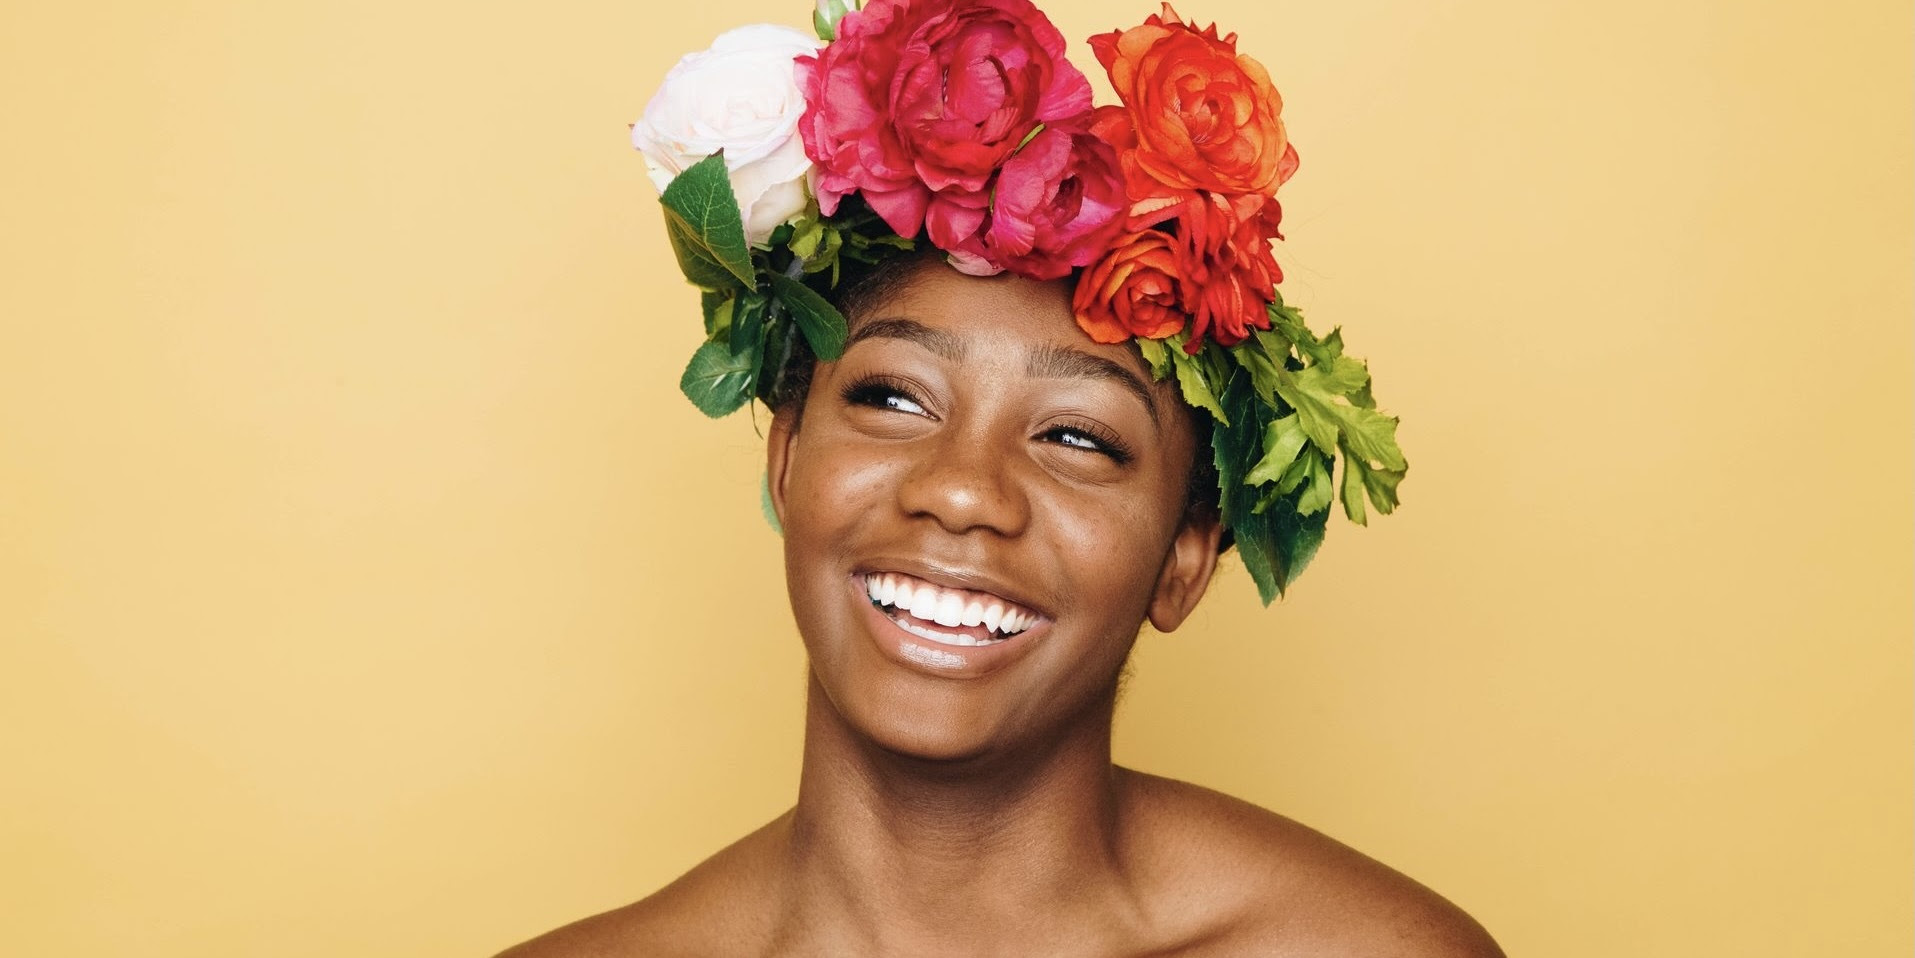 A photograph of a Black woman wearing a crown of big, bright flowers smiles and stands against a yellow wall.